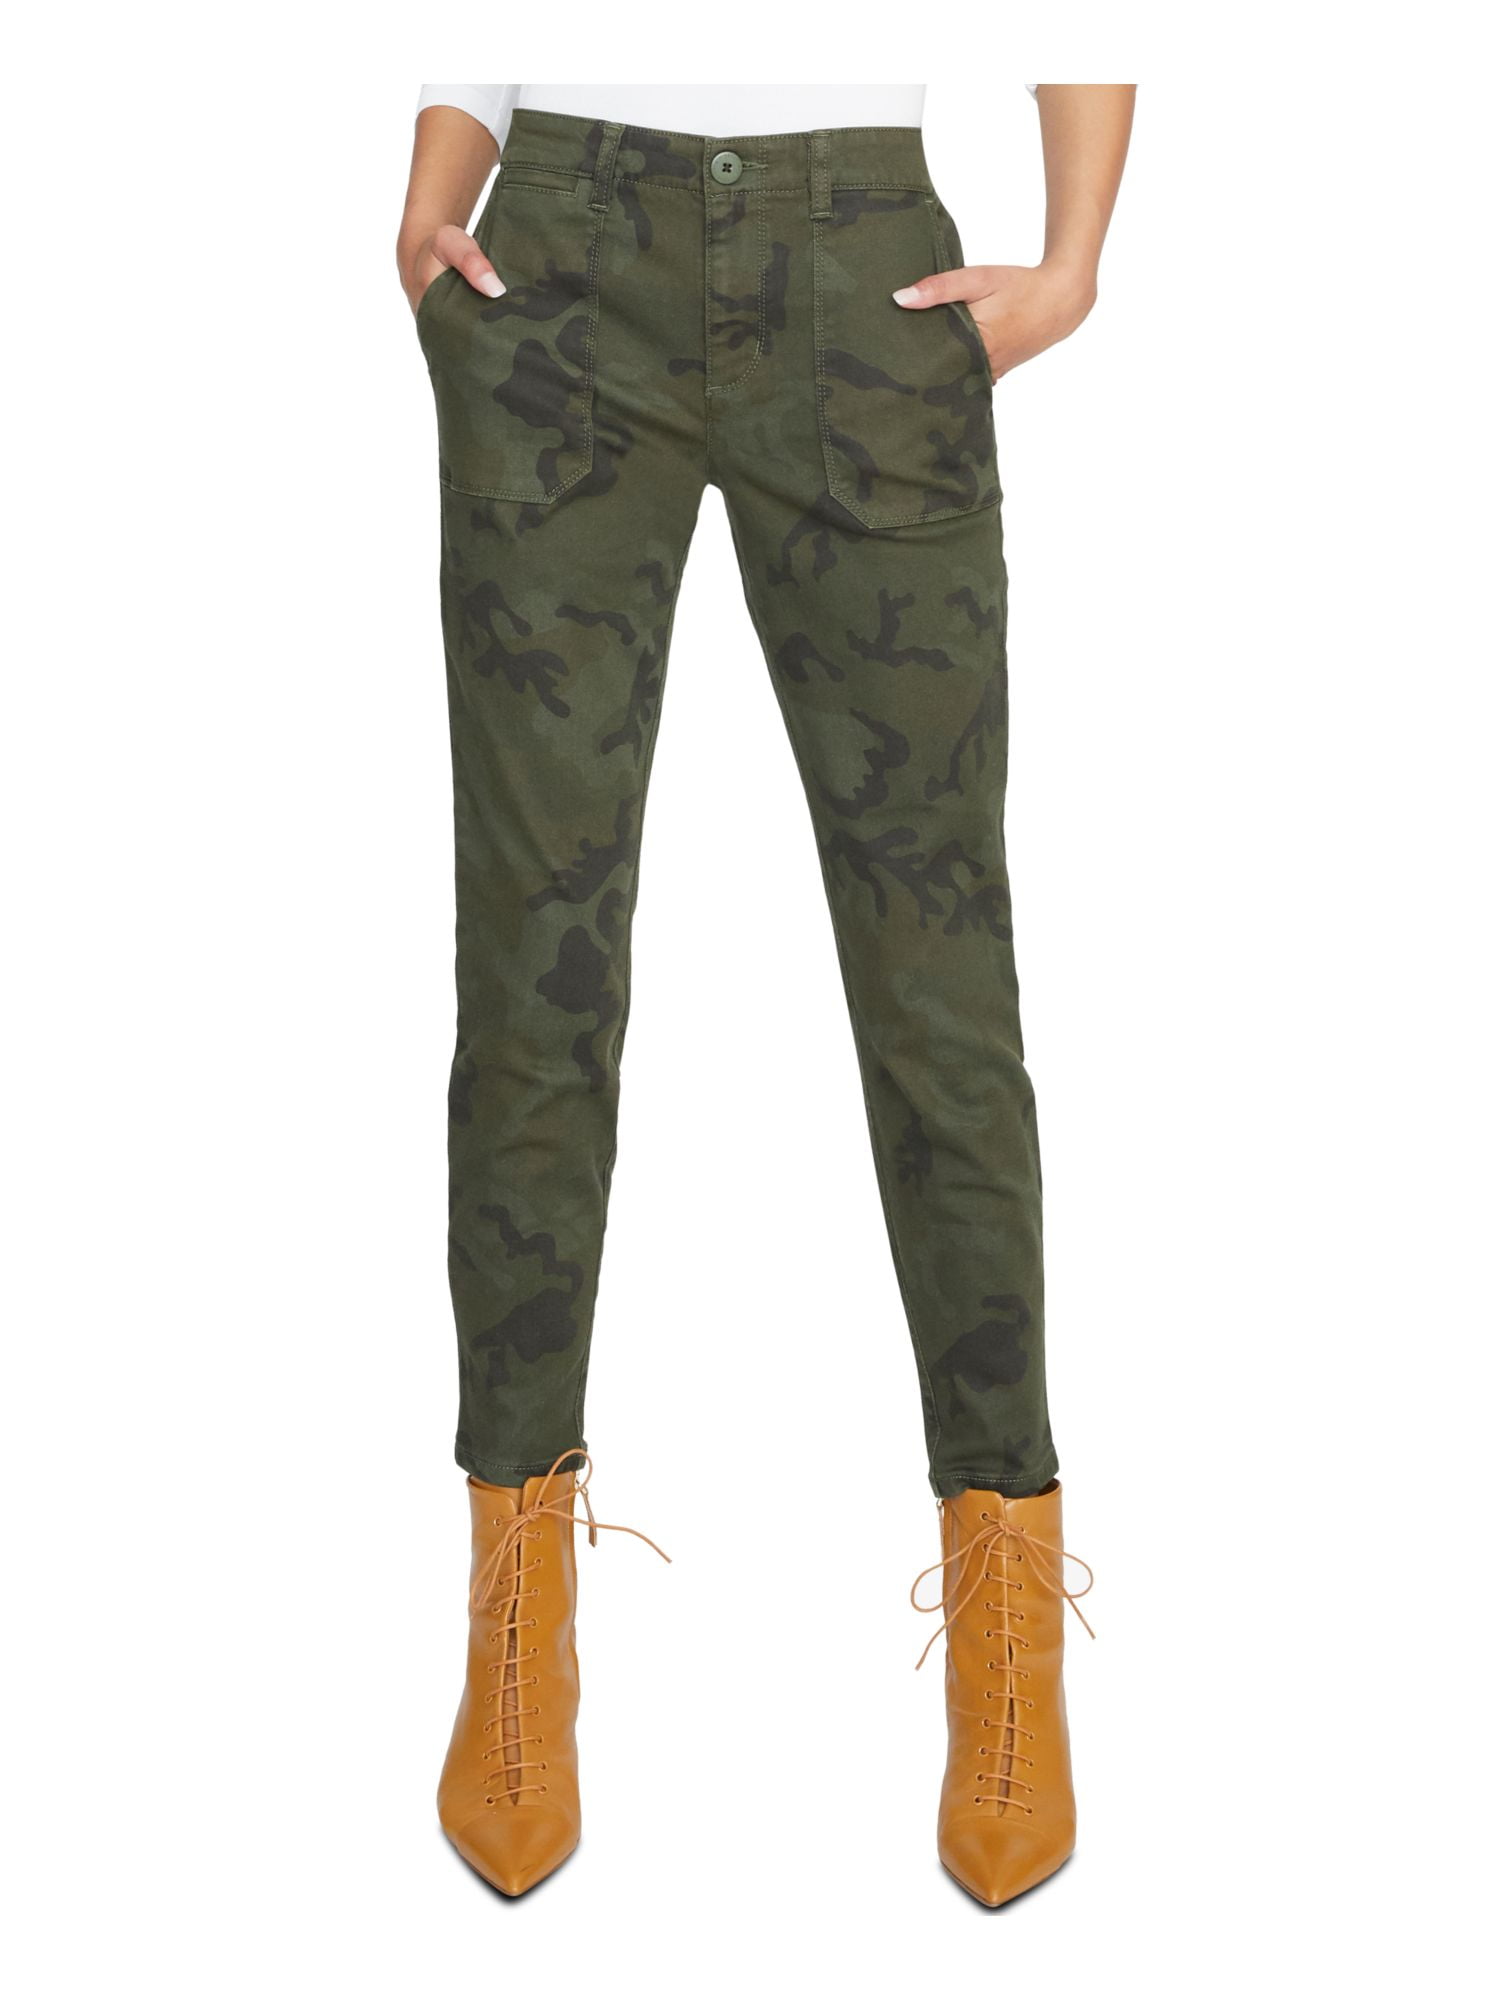 SANCTUARY Womens Green Zippered Pocketed Ankle Camouflage Skinny Jeans  Juniors 24 